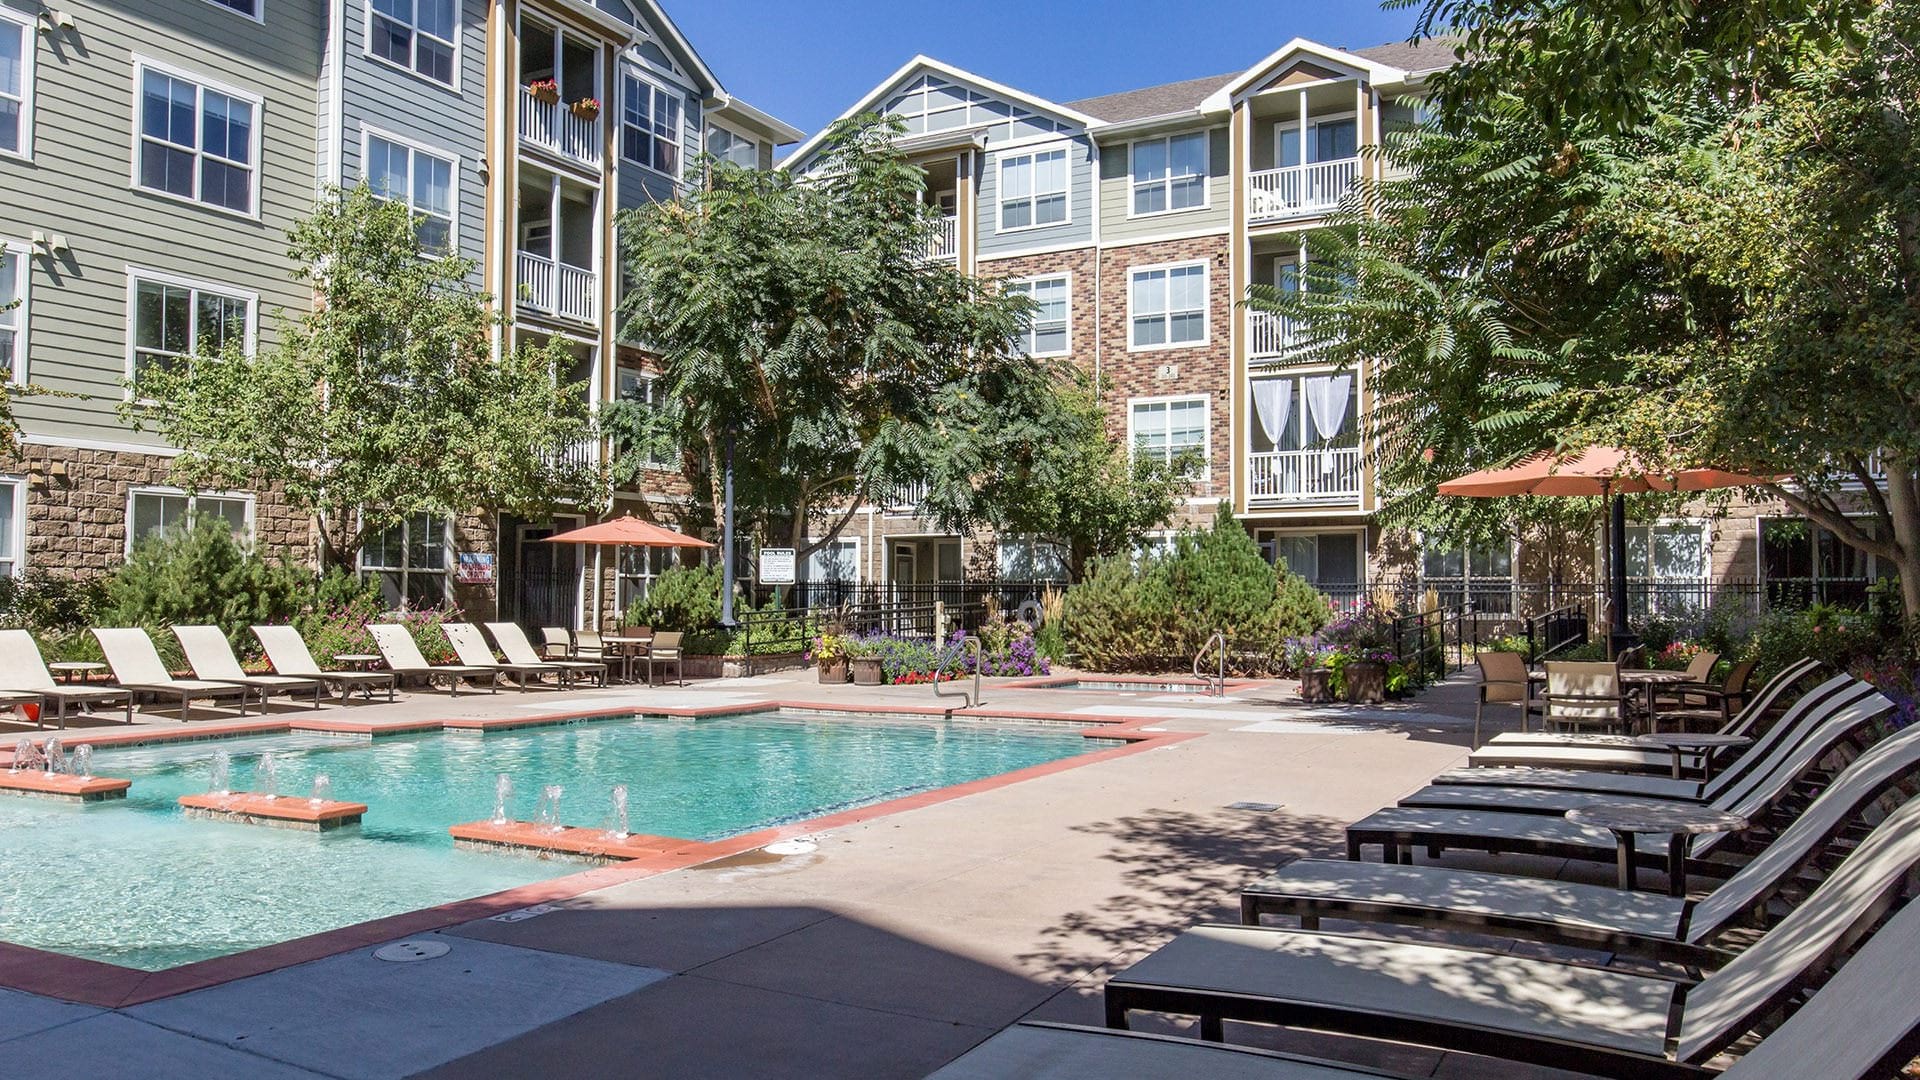 Cortland Pointe Apartments Overlooking the Resort-Style Pool.